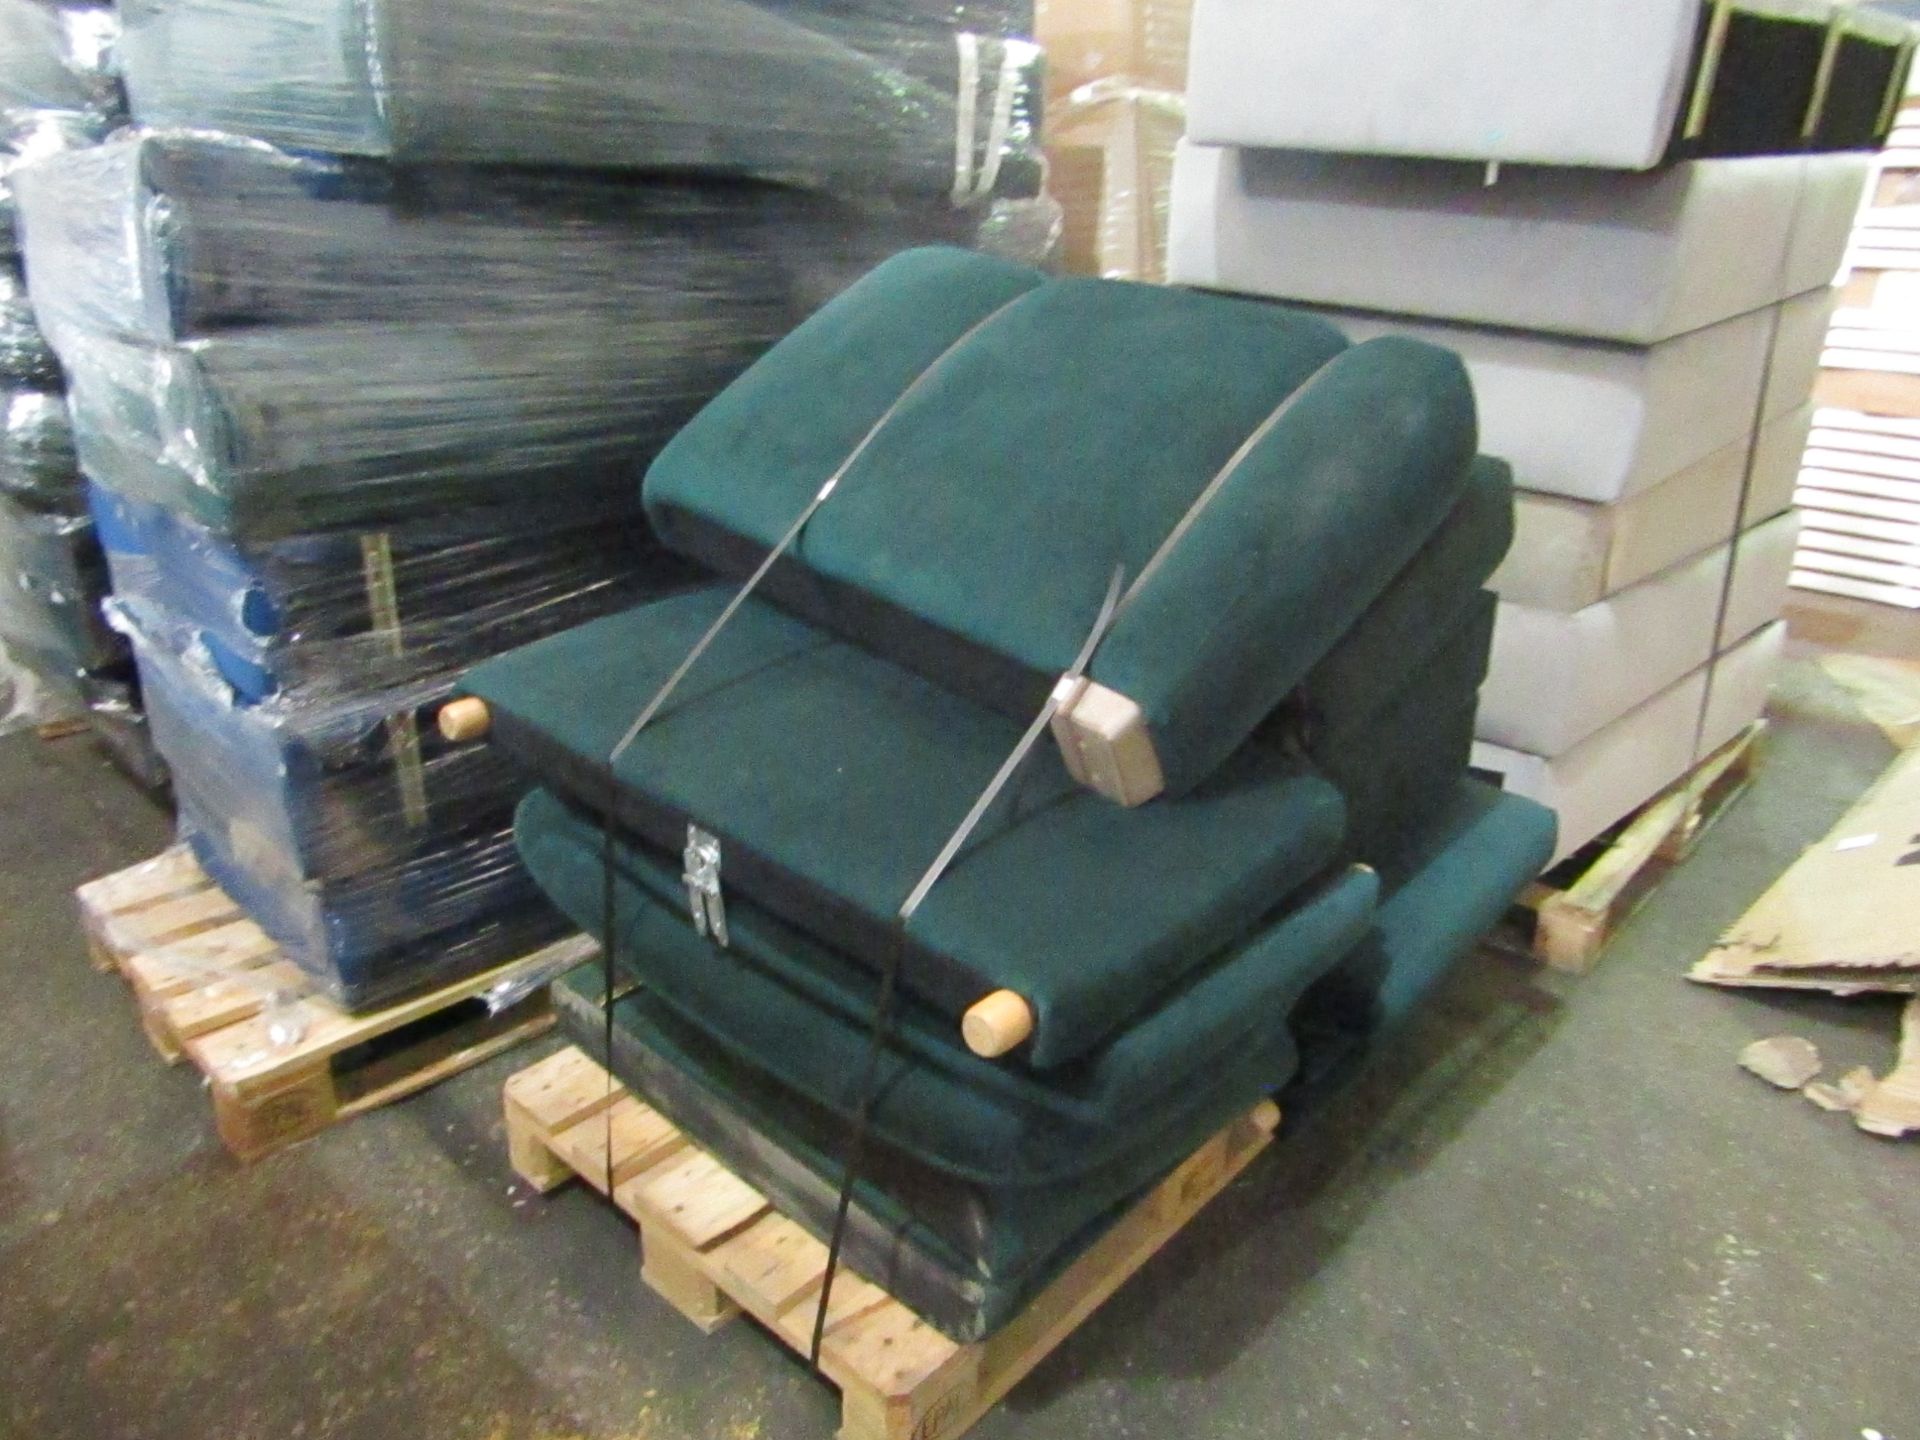 10% Buyers Premium +VAT, 24 Pallets of Genuine SNUG SOFA parts - Mixed Lots of Bases Backs Arms - Image 10 of 20